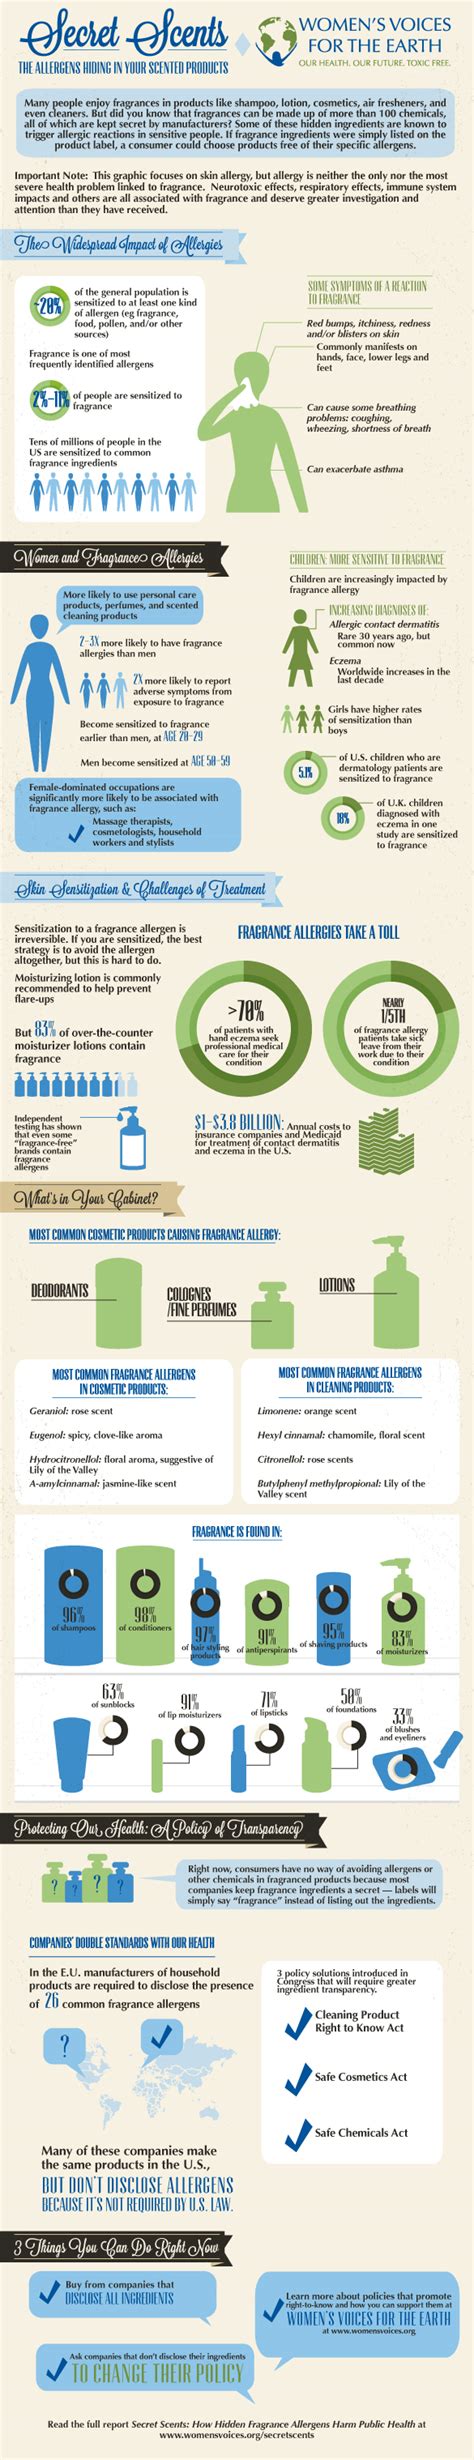 Fragrance Allergens - Infographic by Women's Voices for the Earth